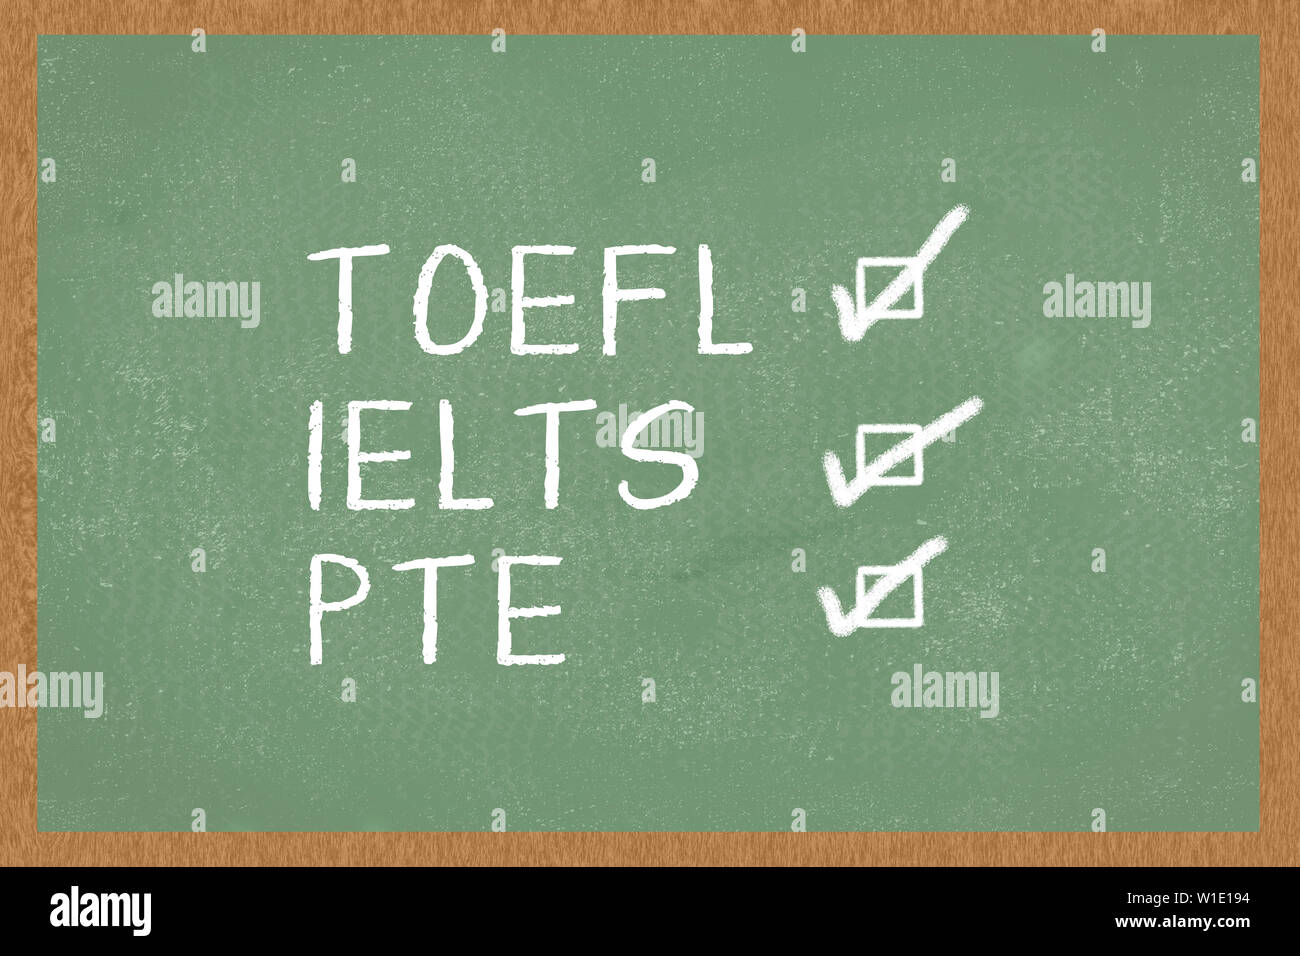 Word TOEFL, IELTS, PTE , with boxes to tick on green Chalkboard background. Test of English as a Foreign Language exams Stock Photo